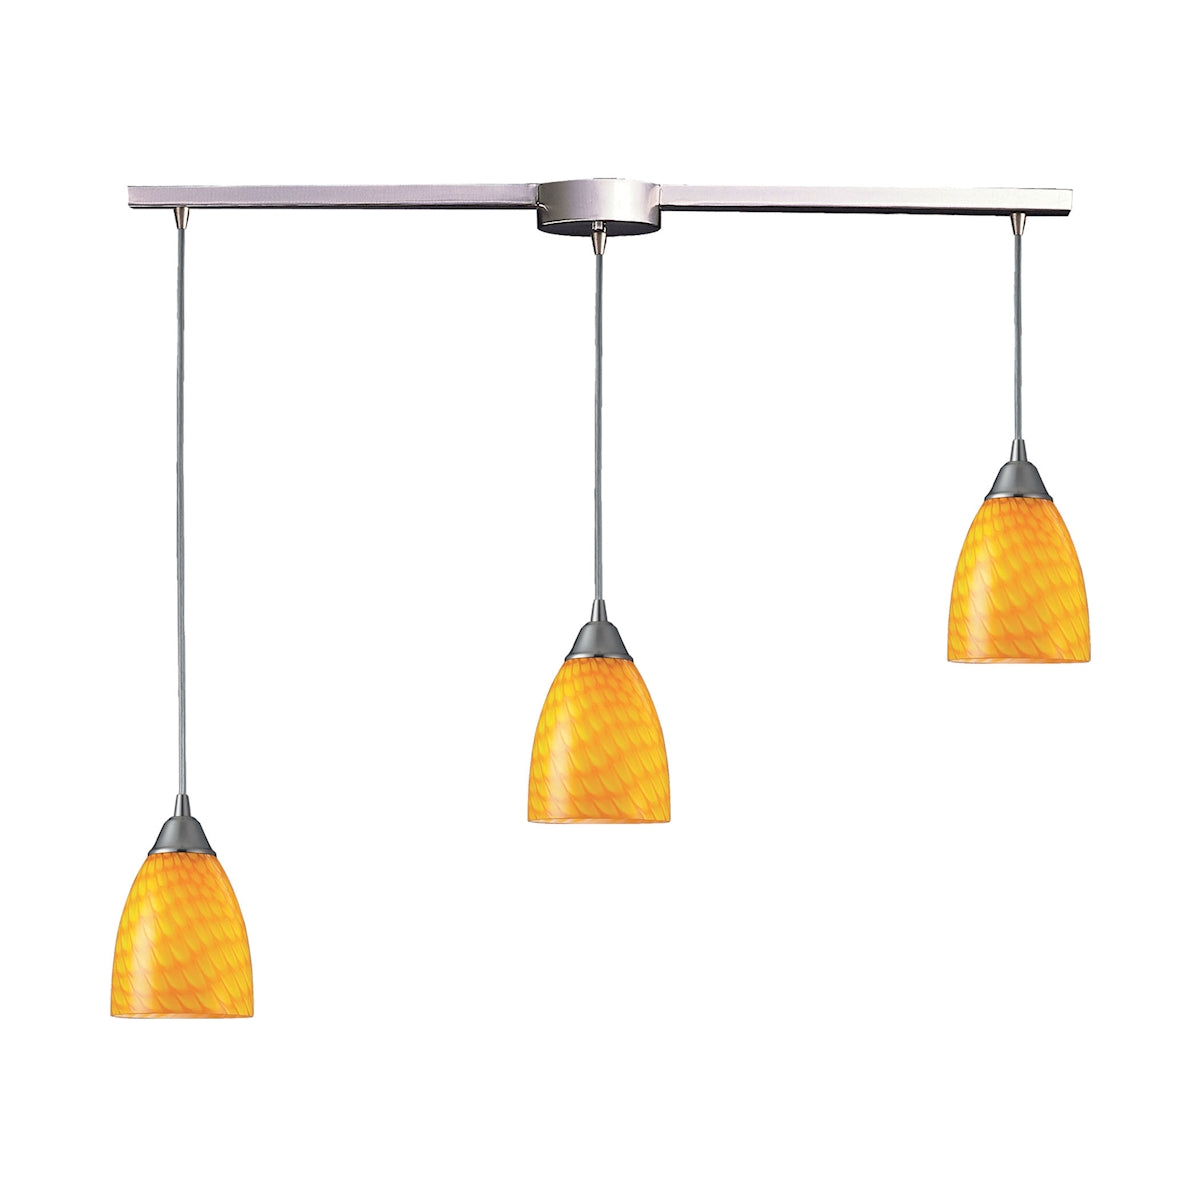 ELK Lighting 416-3L-CN Arco Baleno 3-Light Linear Pendant Fixture in Satin Nickel with Canary Glass